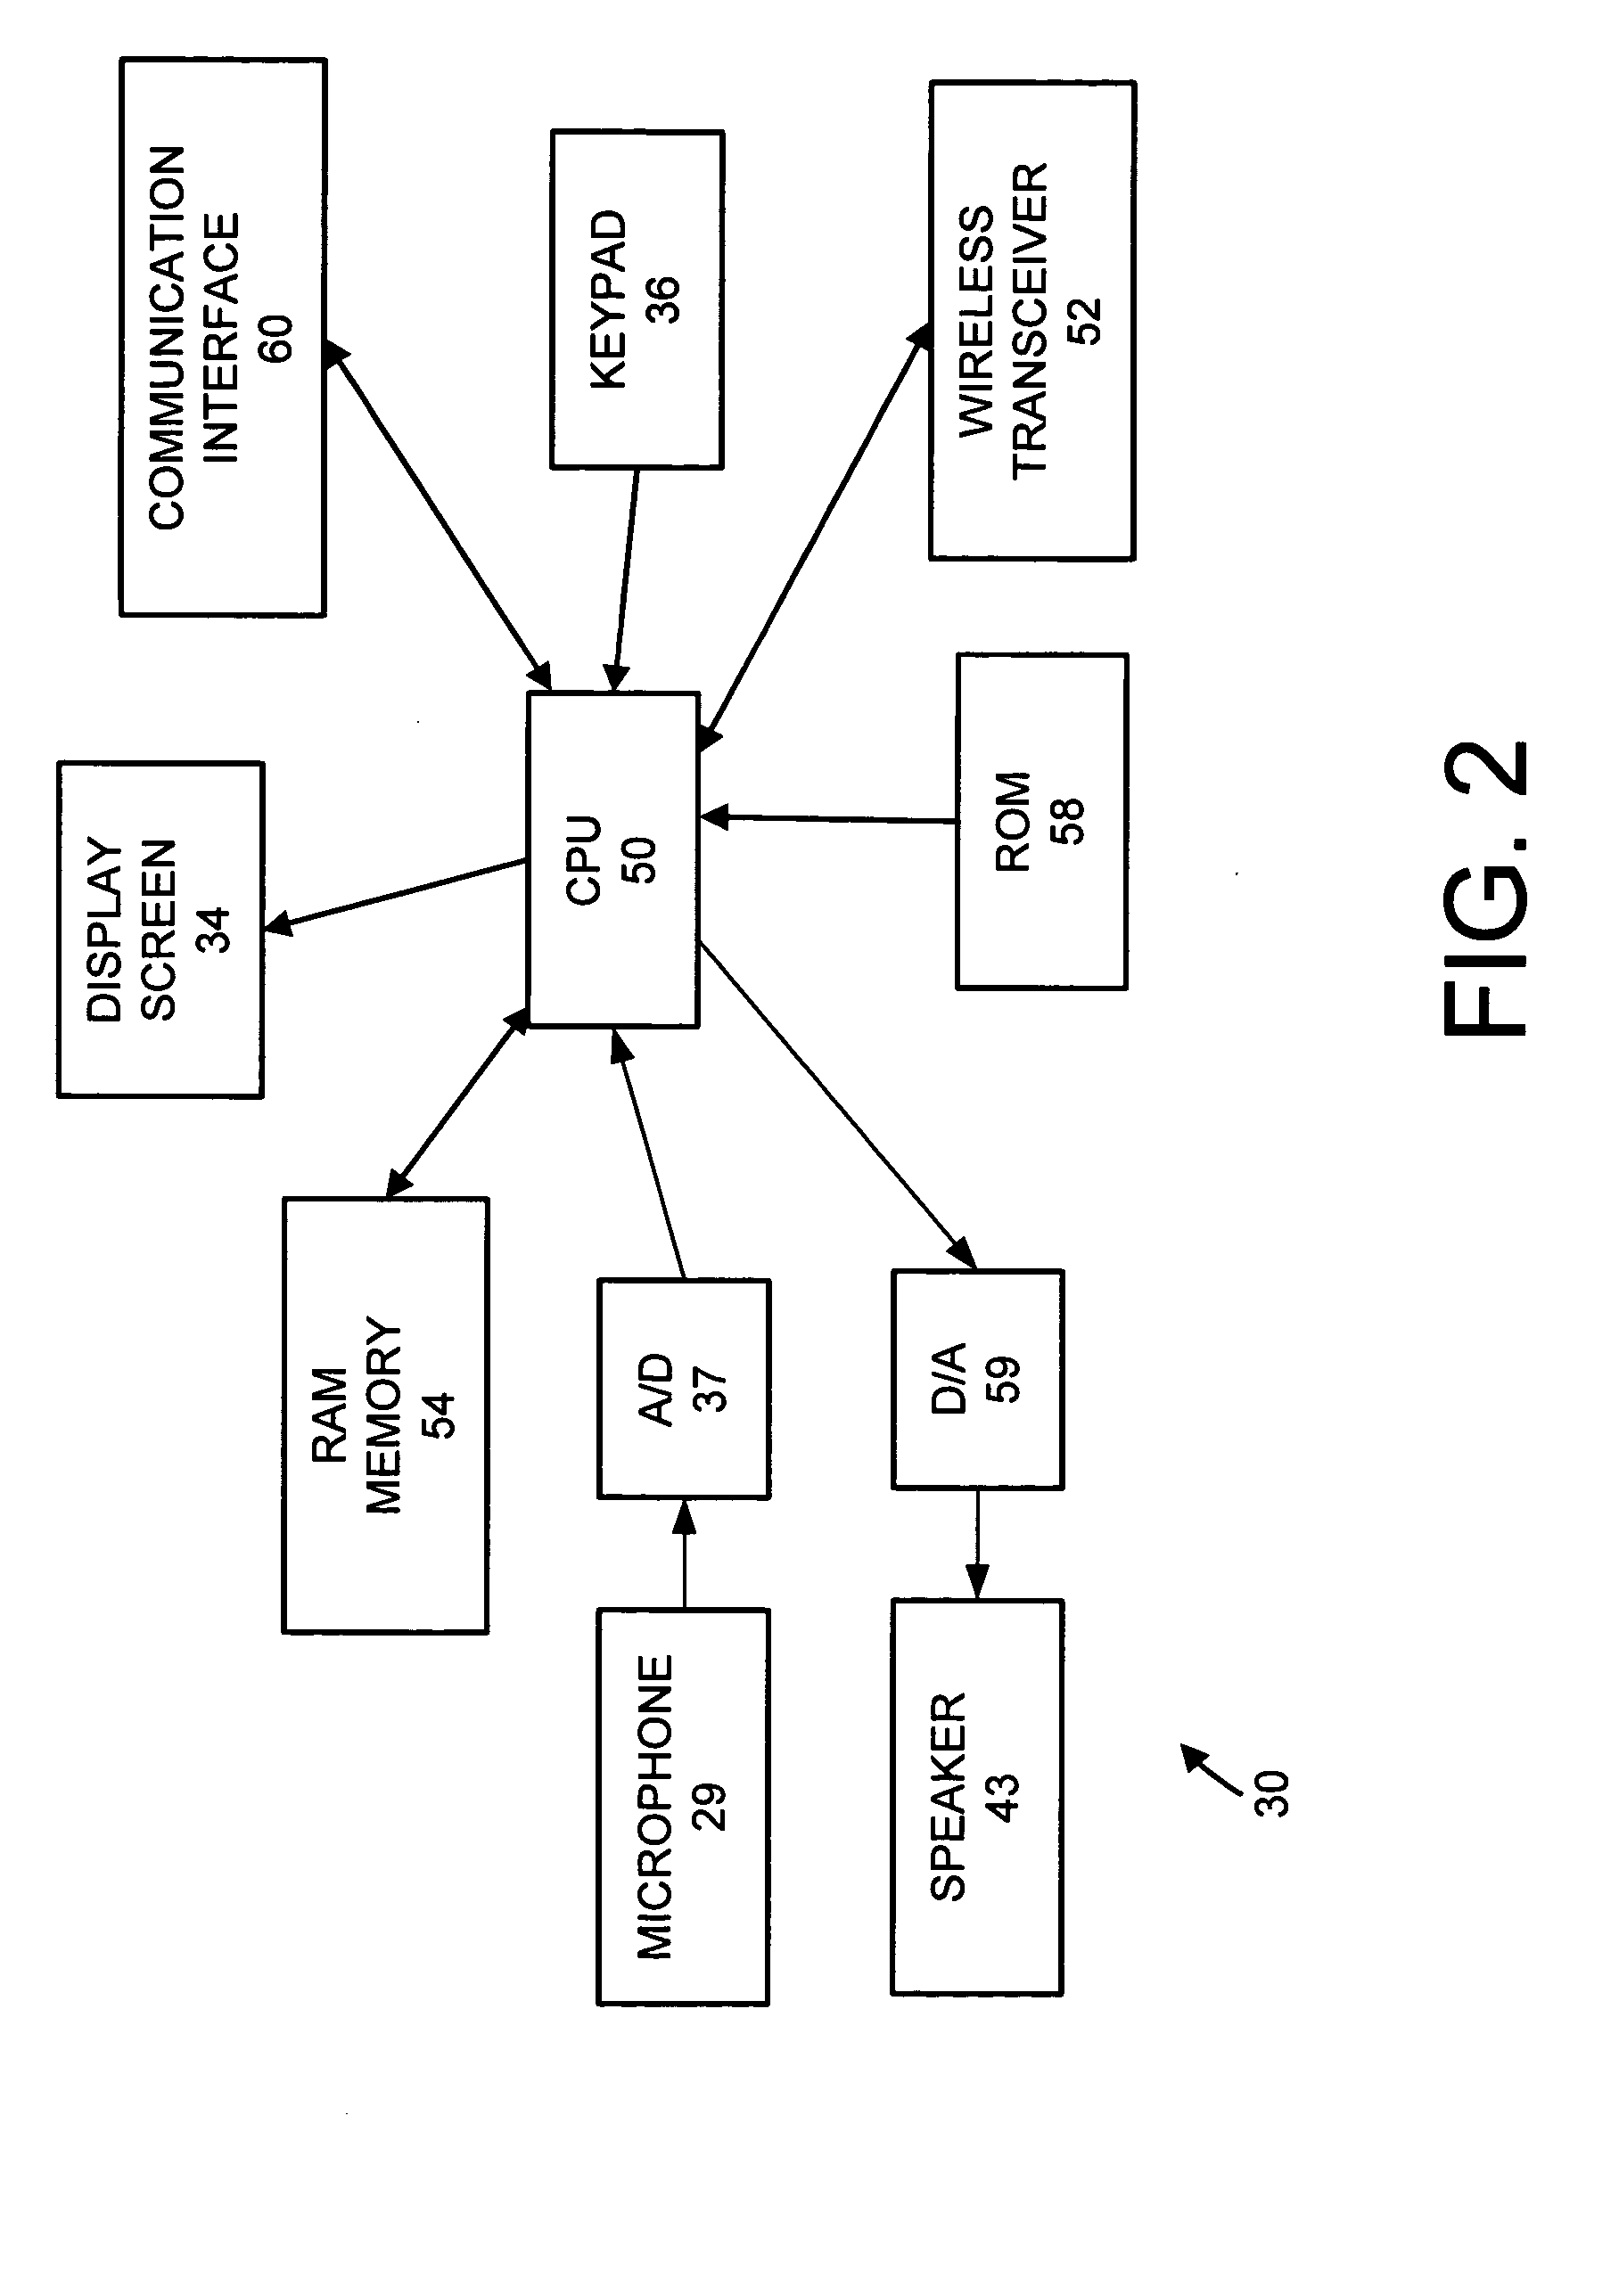 Dialog component re-use in recognition systems